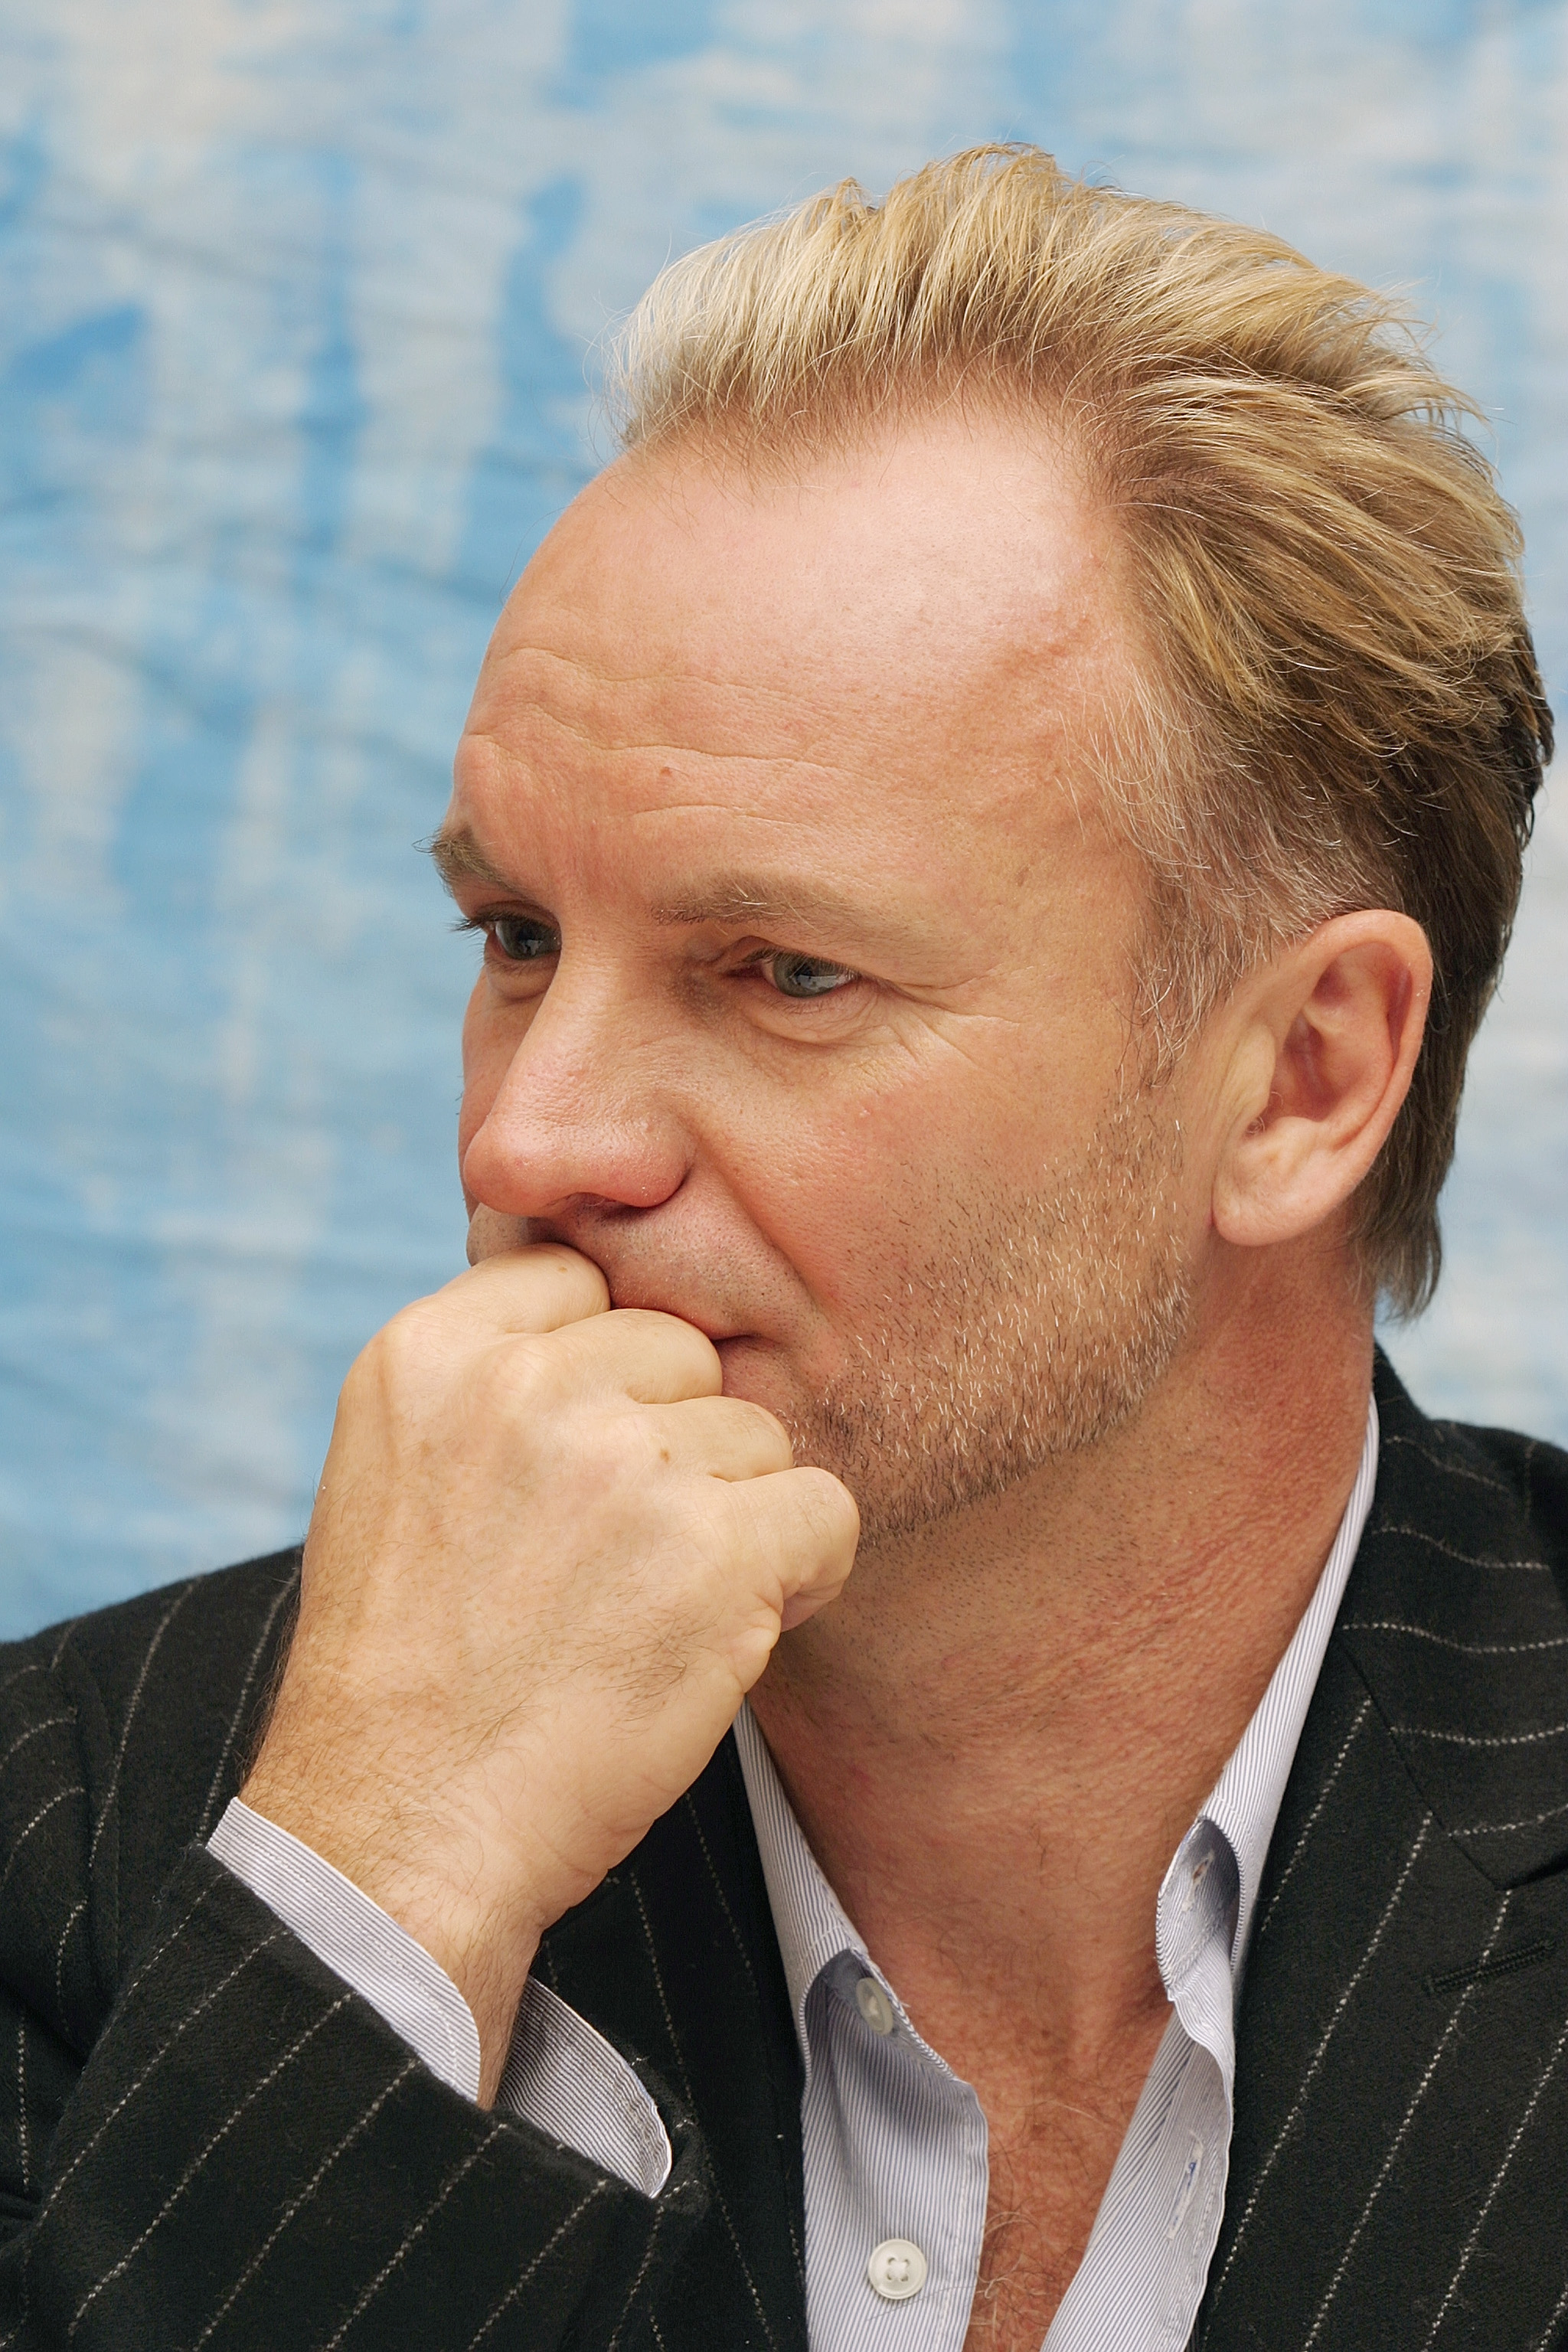 Sting answers questions from the press at a junket for his new film "Cold Mountain" in Los Angeles, California on December 8, 2003. | Source: Getty Images